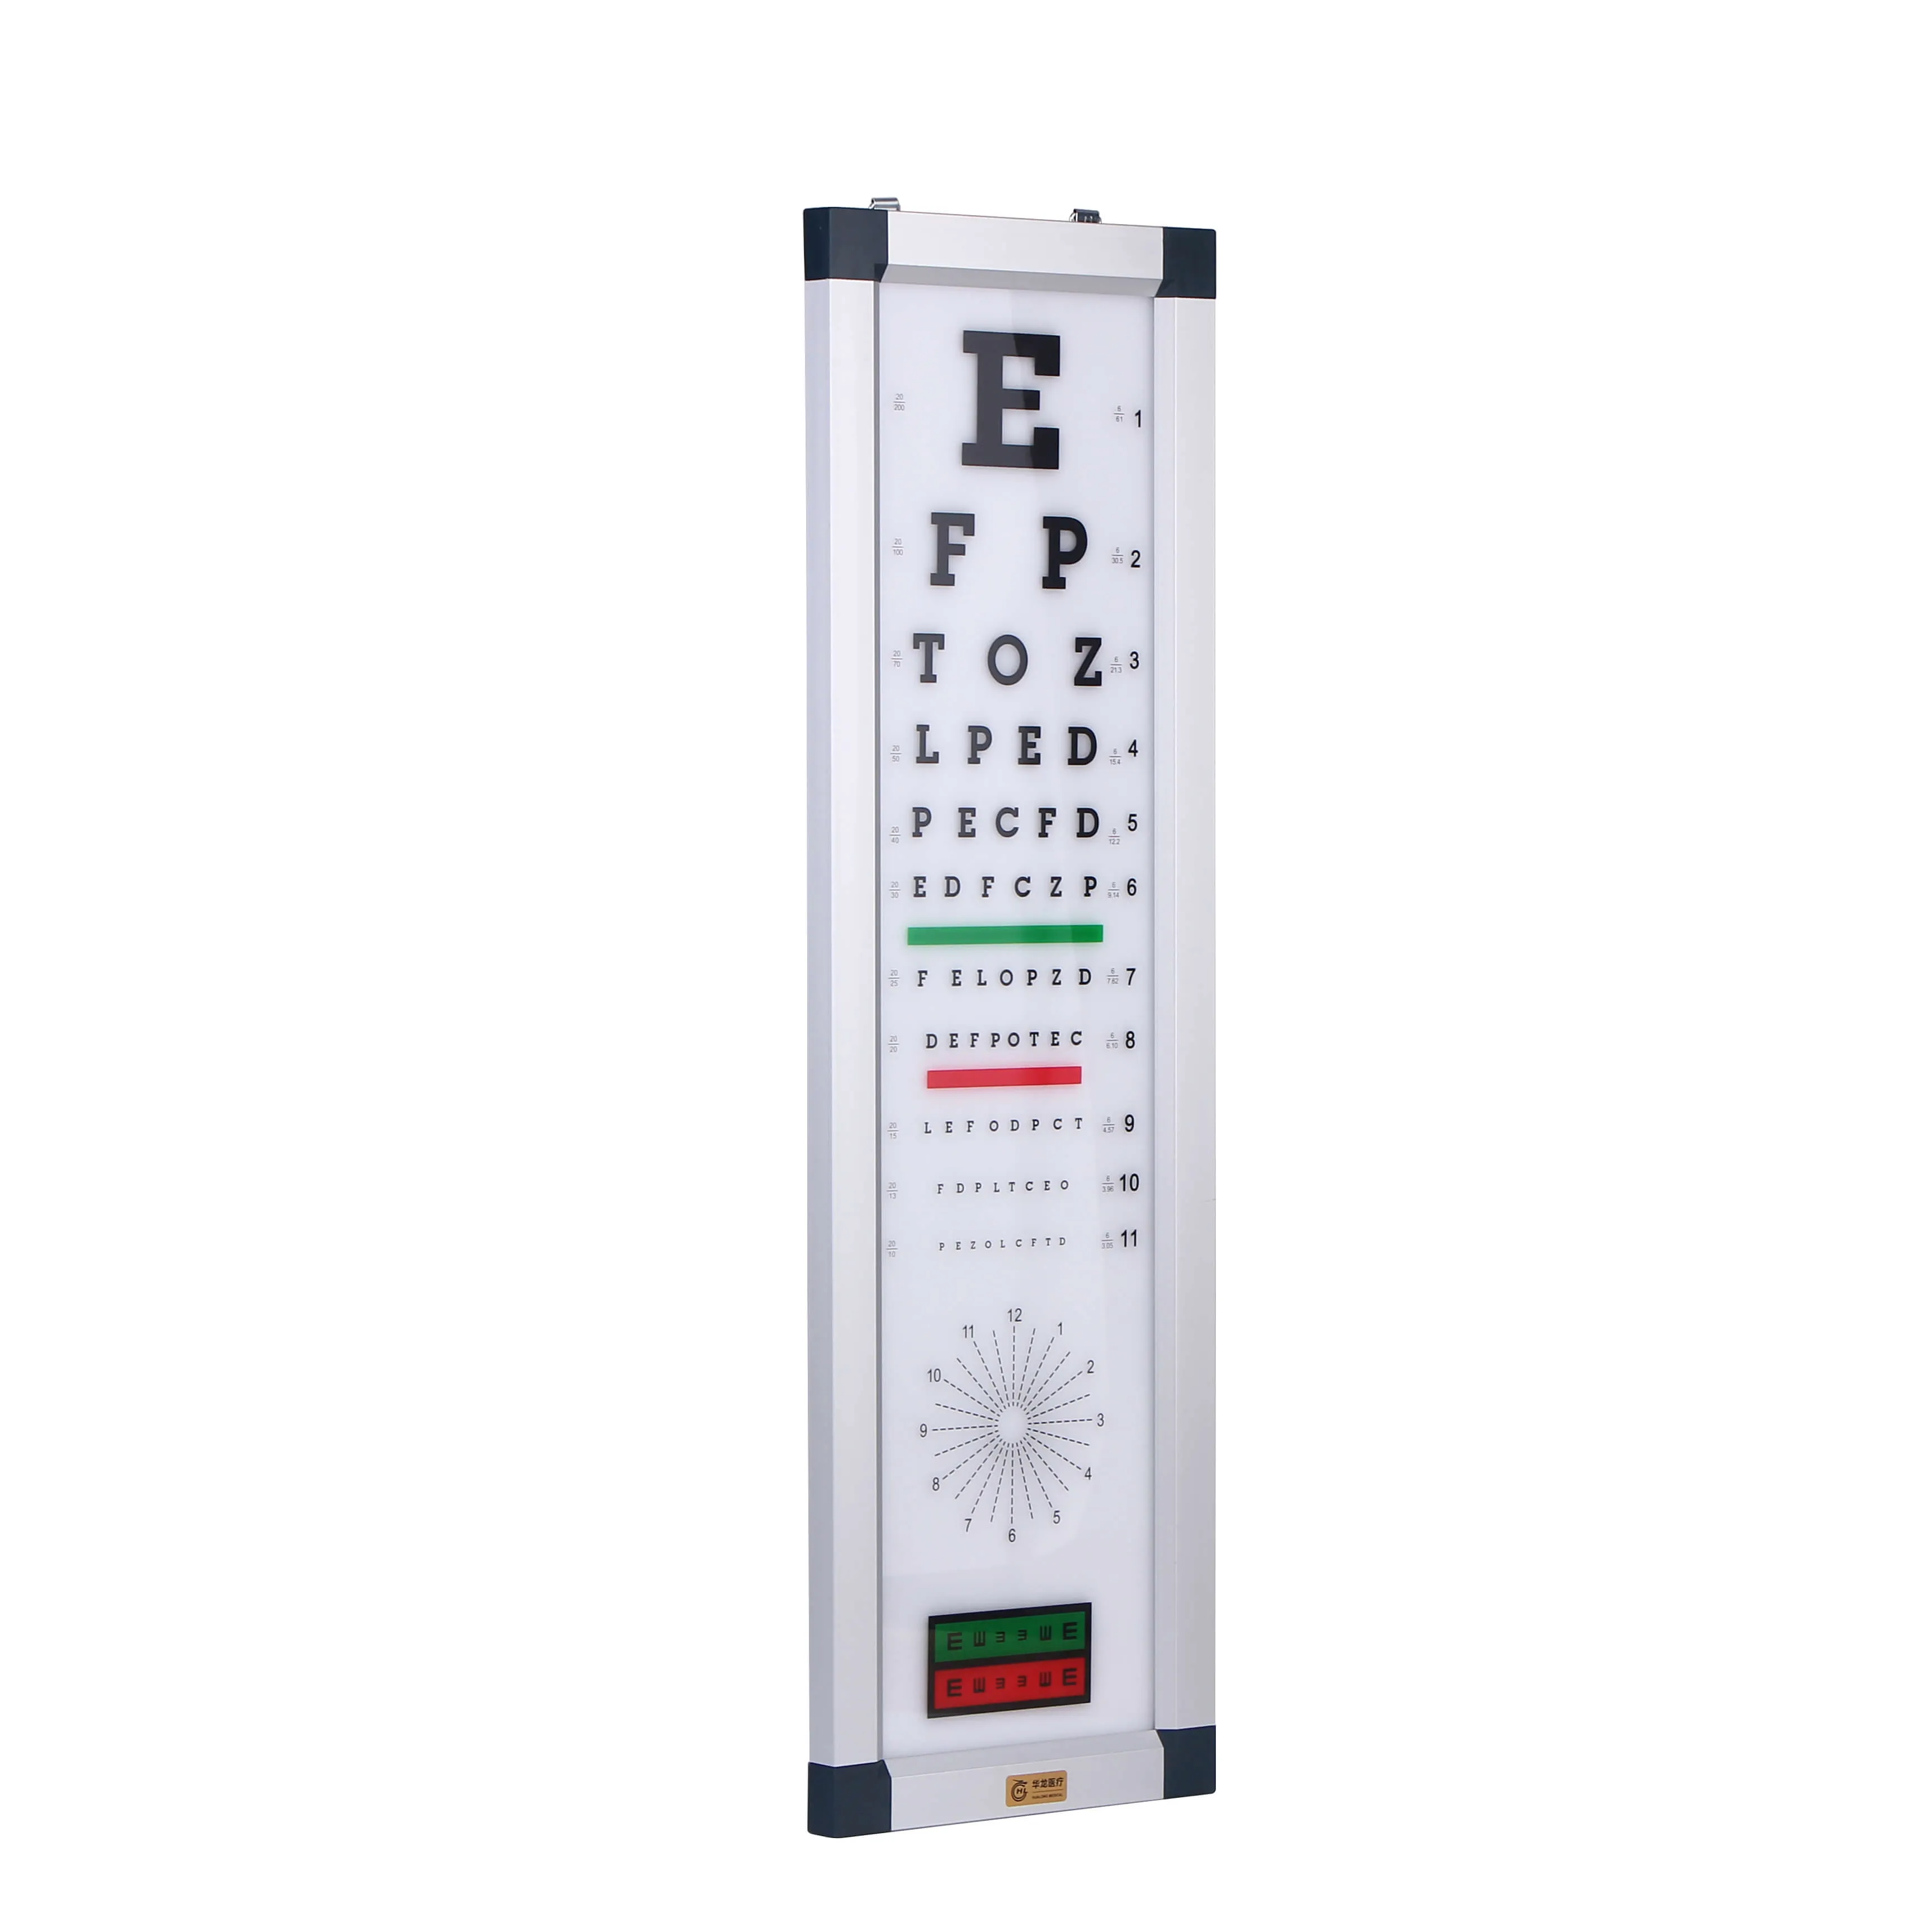 China factory directly supply LCD vision test chart vision chart led